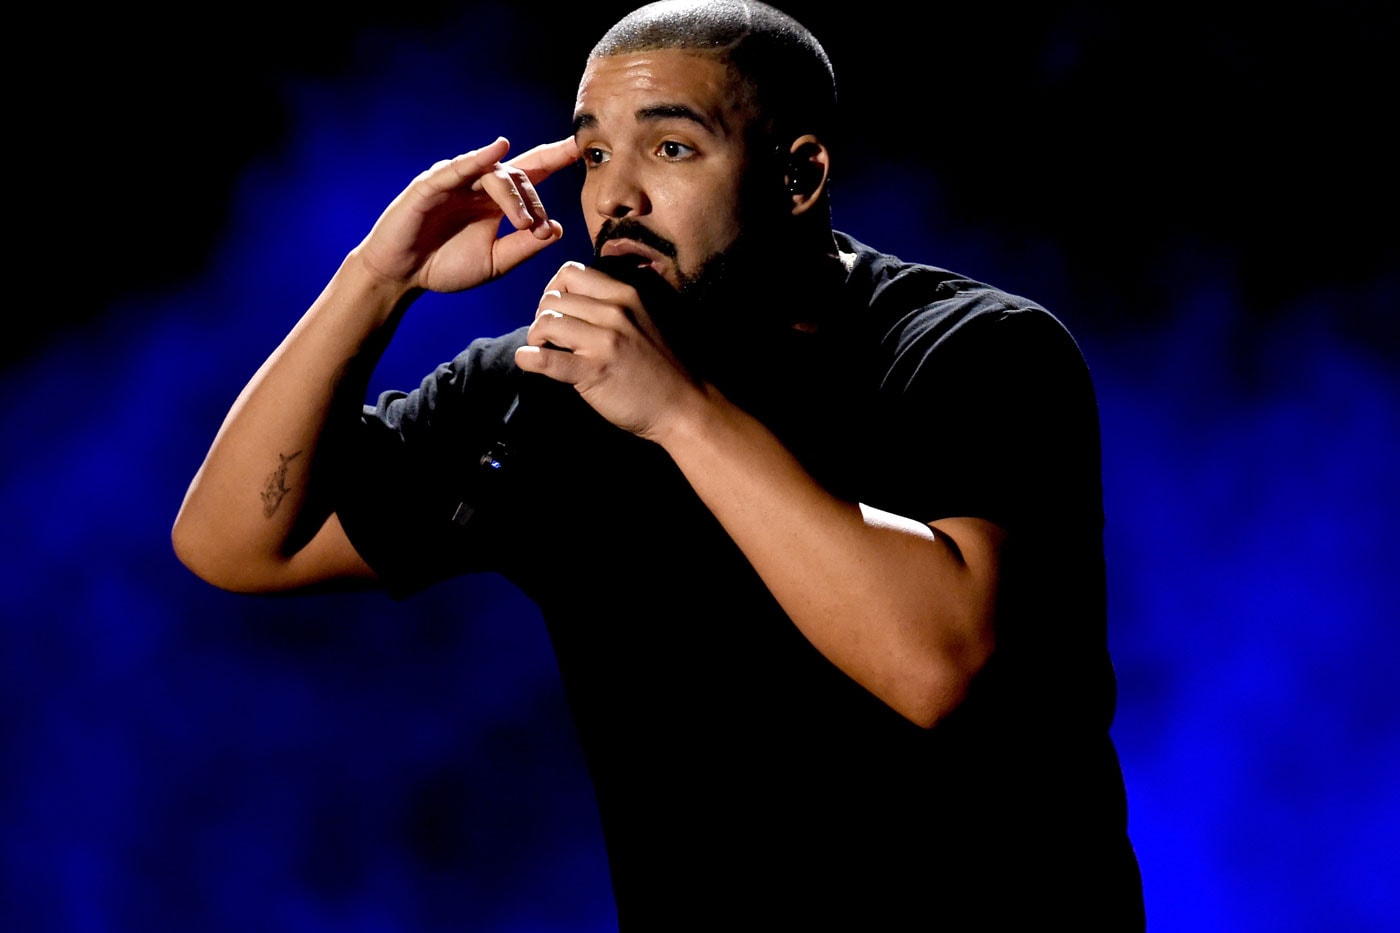 Check out Drake's OVO Fest Performance of "Back to Back" in This Fan-Made Video